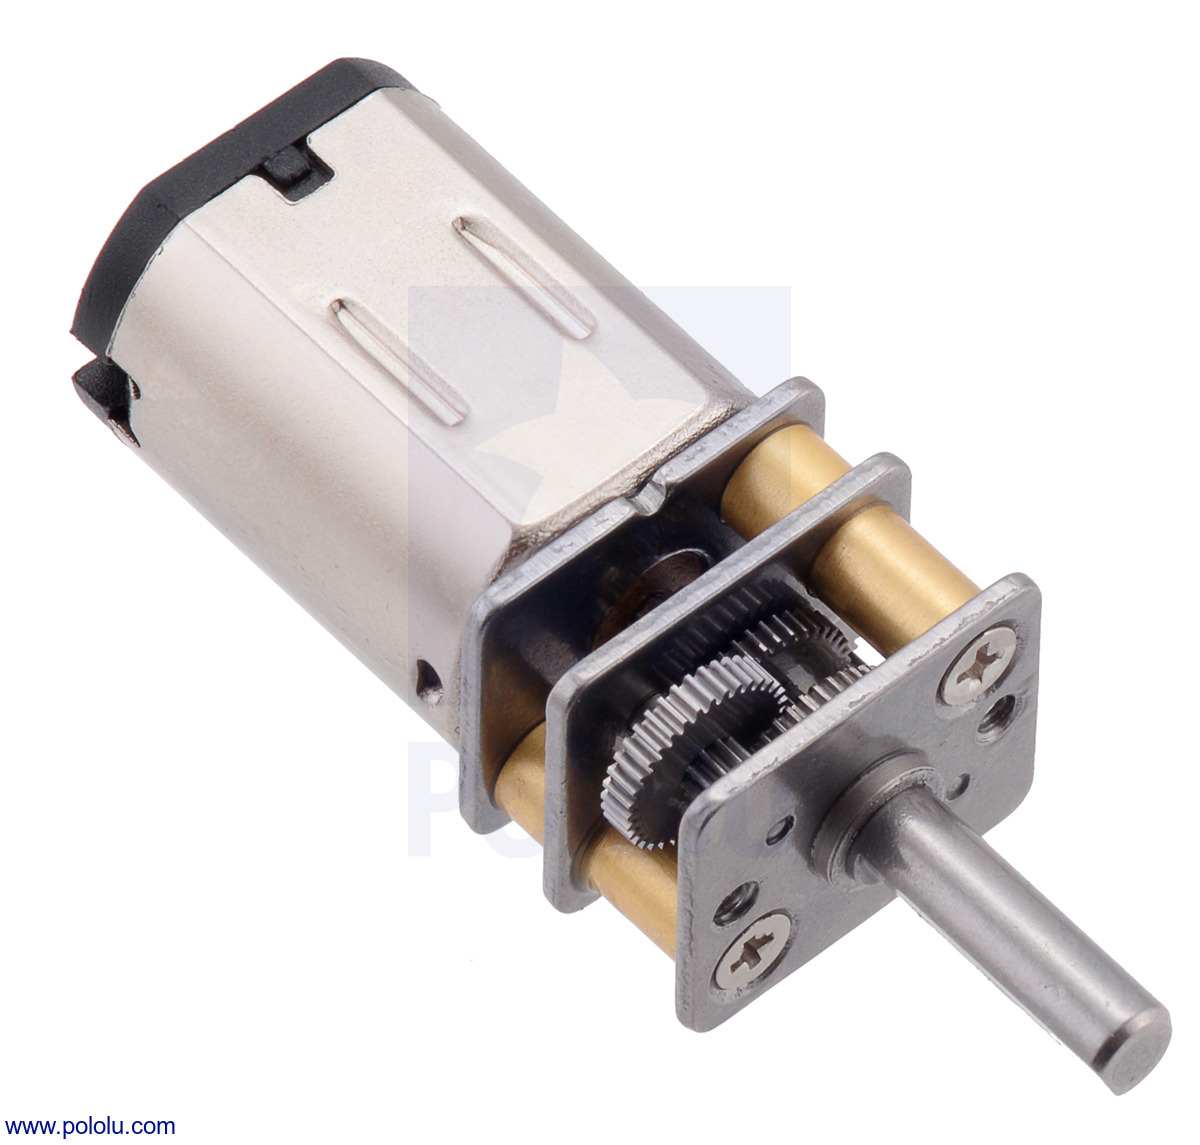 Available in UK General Purpose 12v 85 RPM Gearmotor with Mounting Bracket 